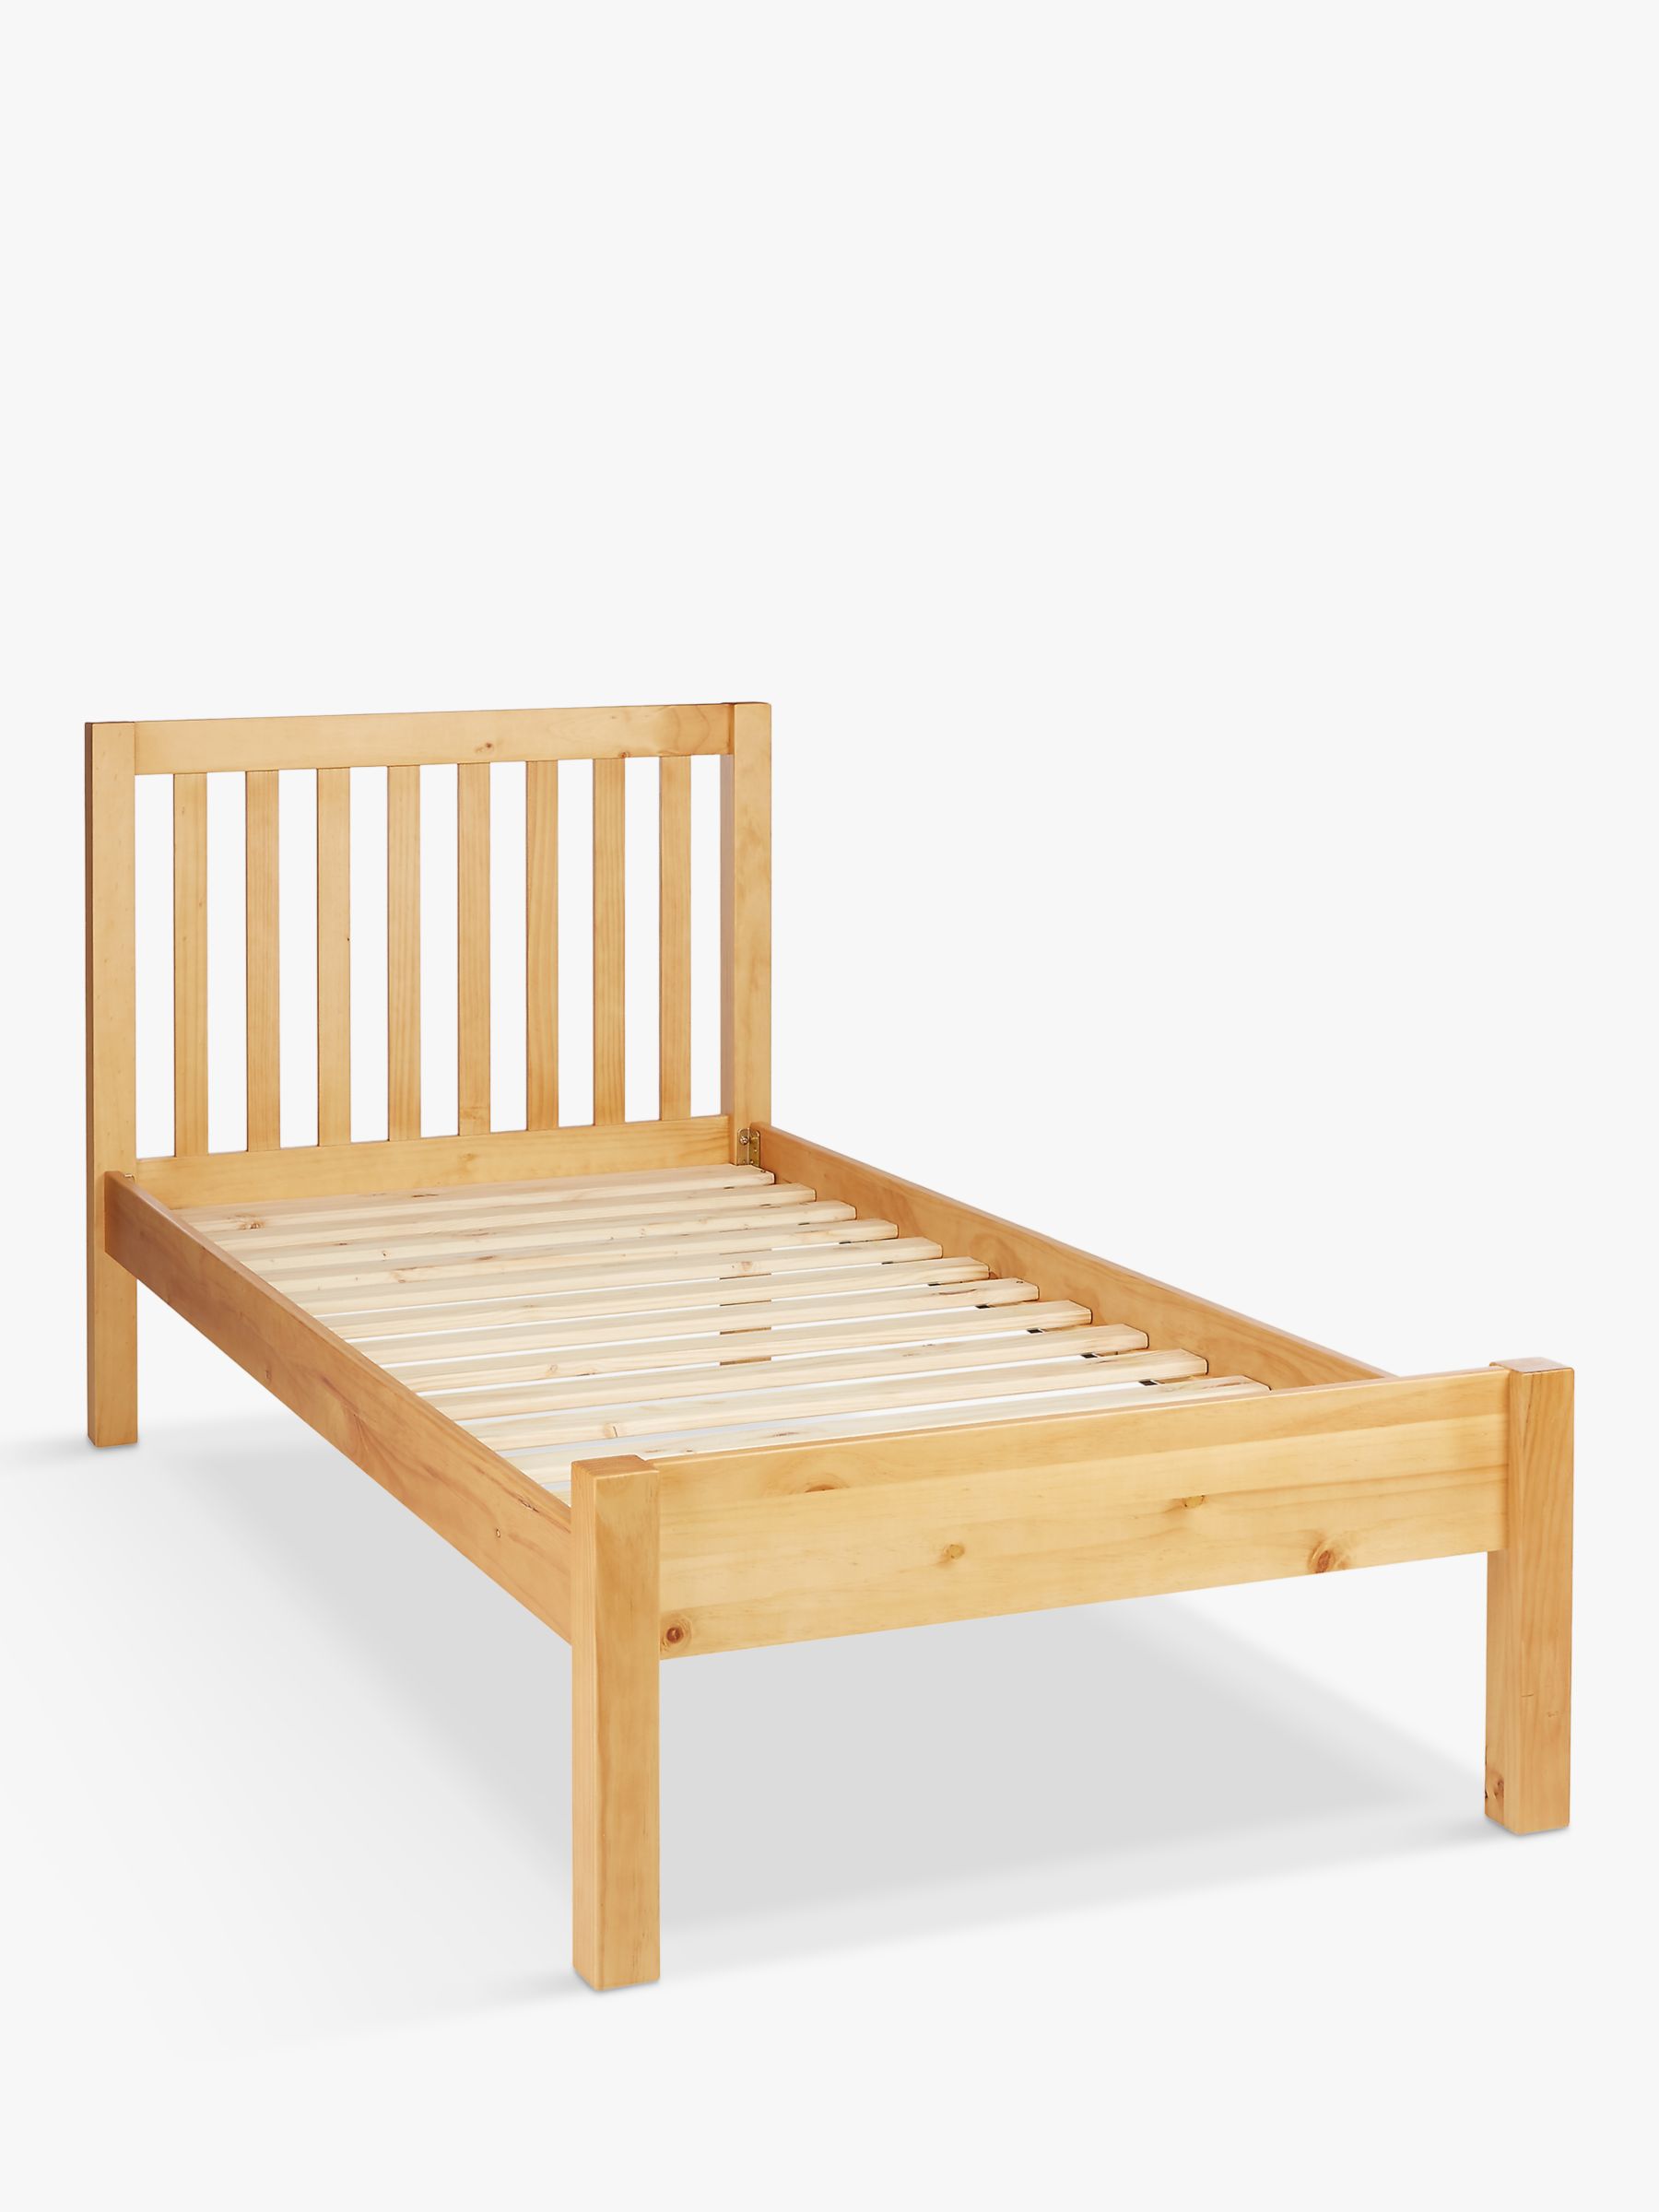 lewis john bed single wilton frame partners compliant anyday child natural johnlewis